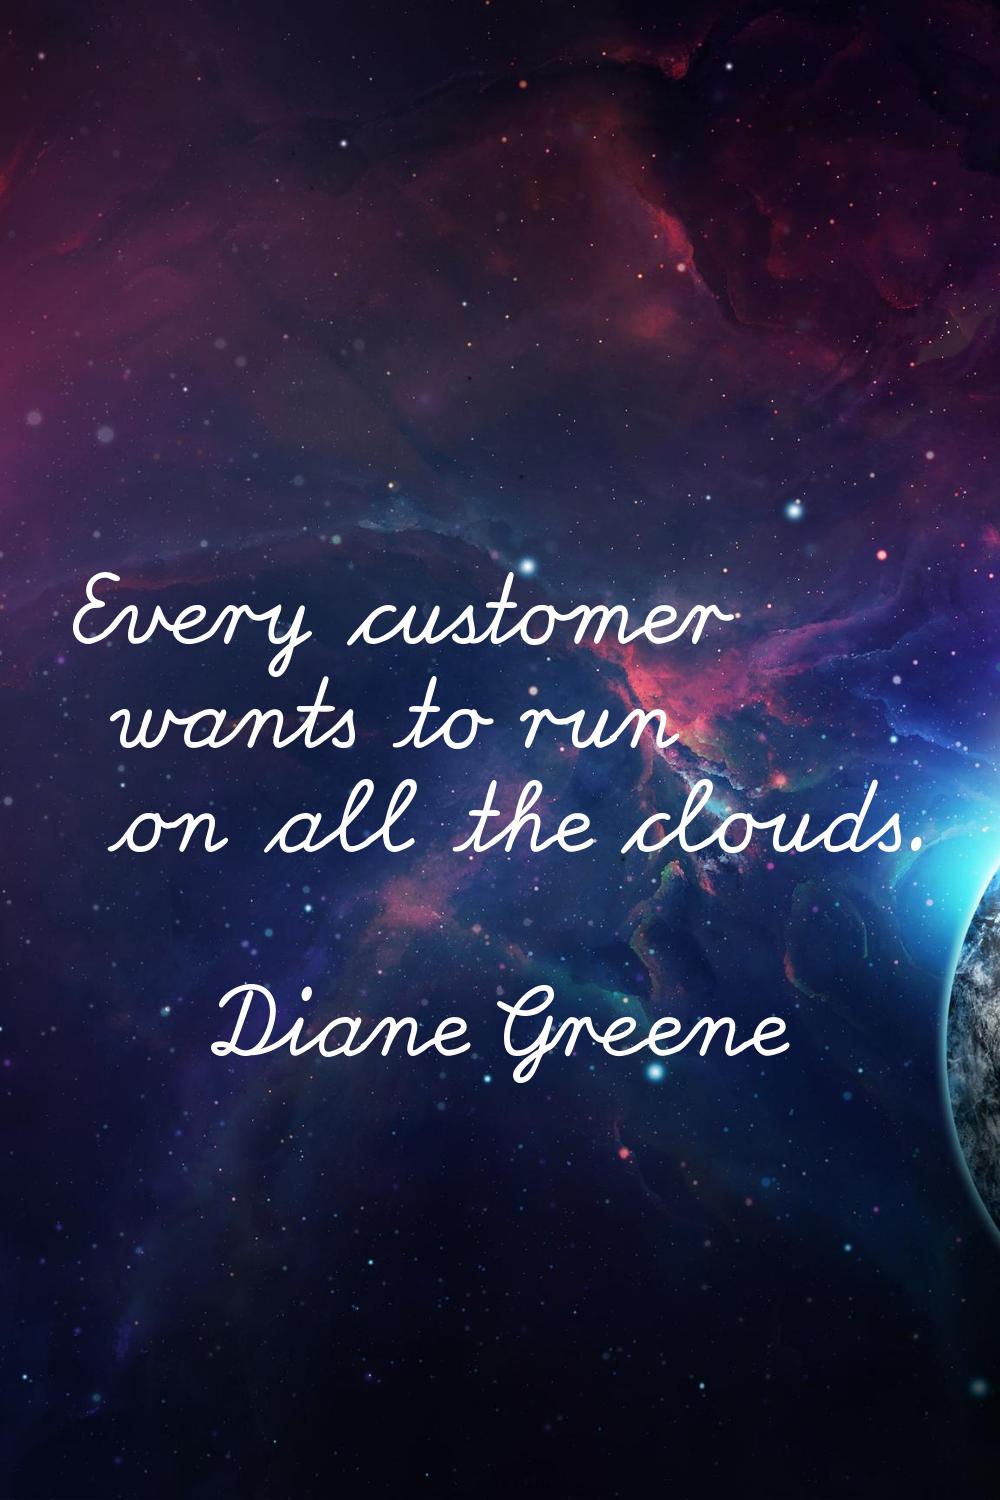 Every customer wants to run on all the clouds.